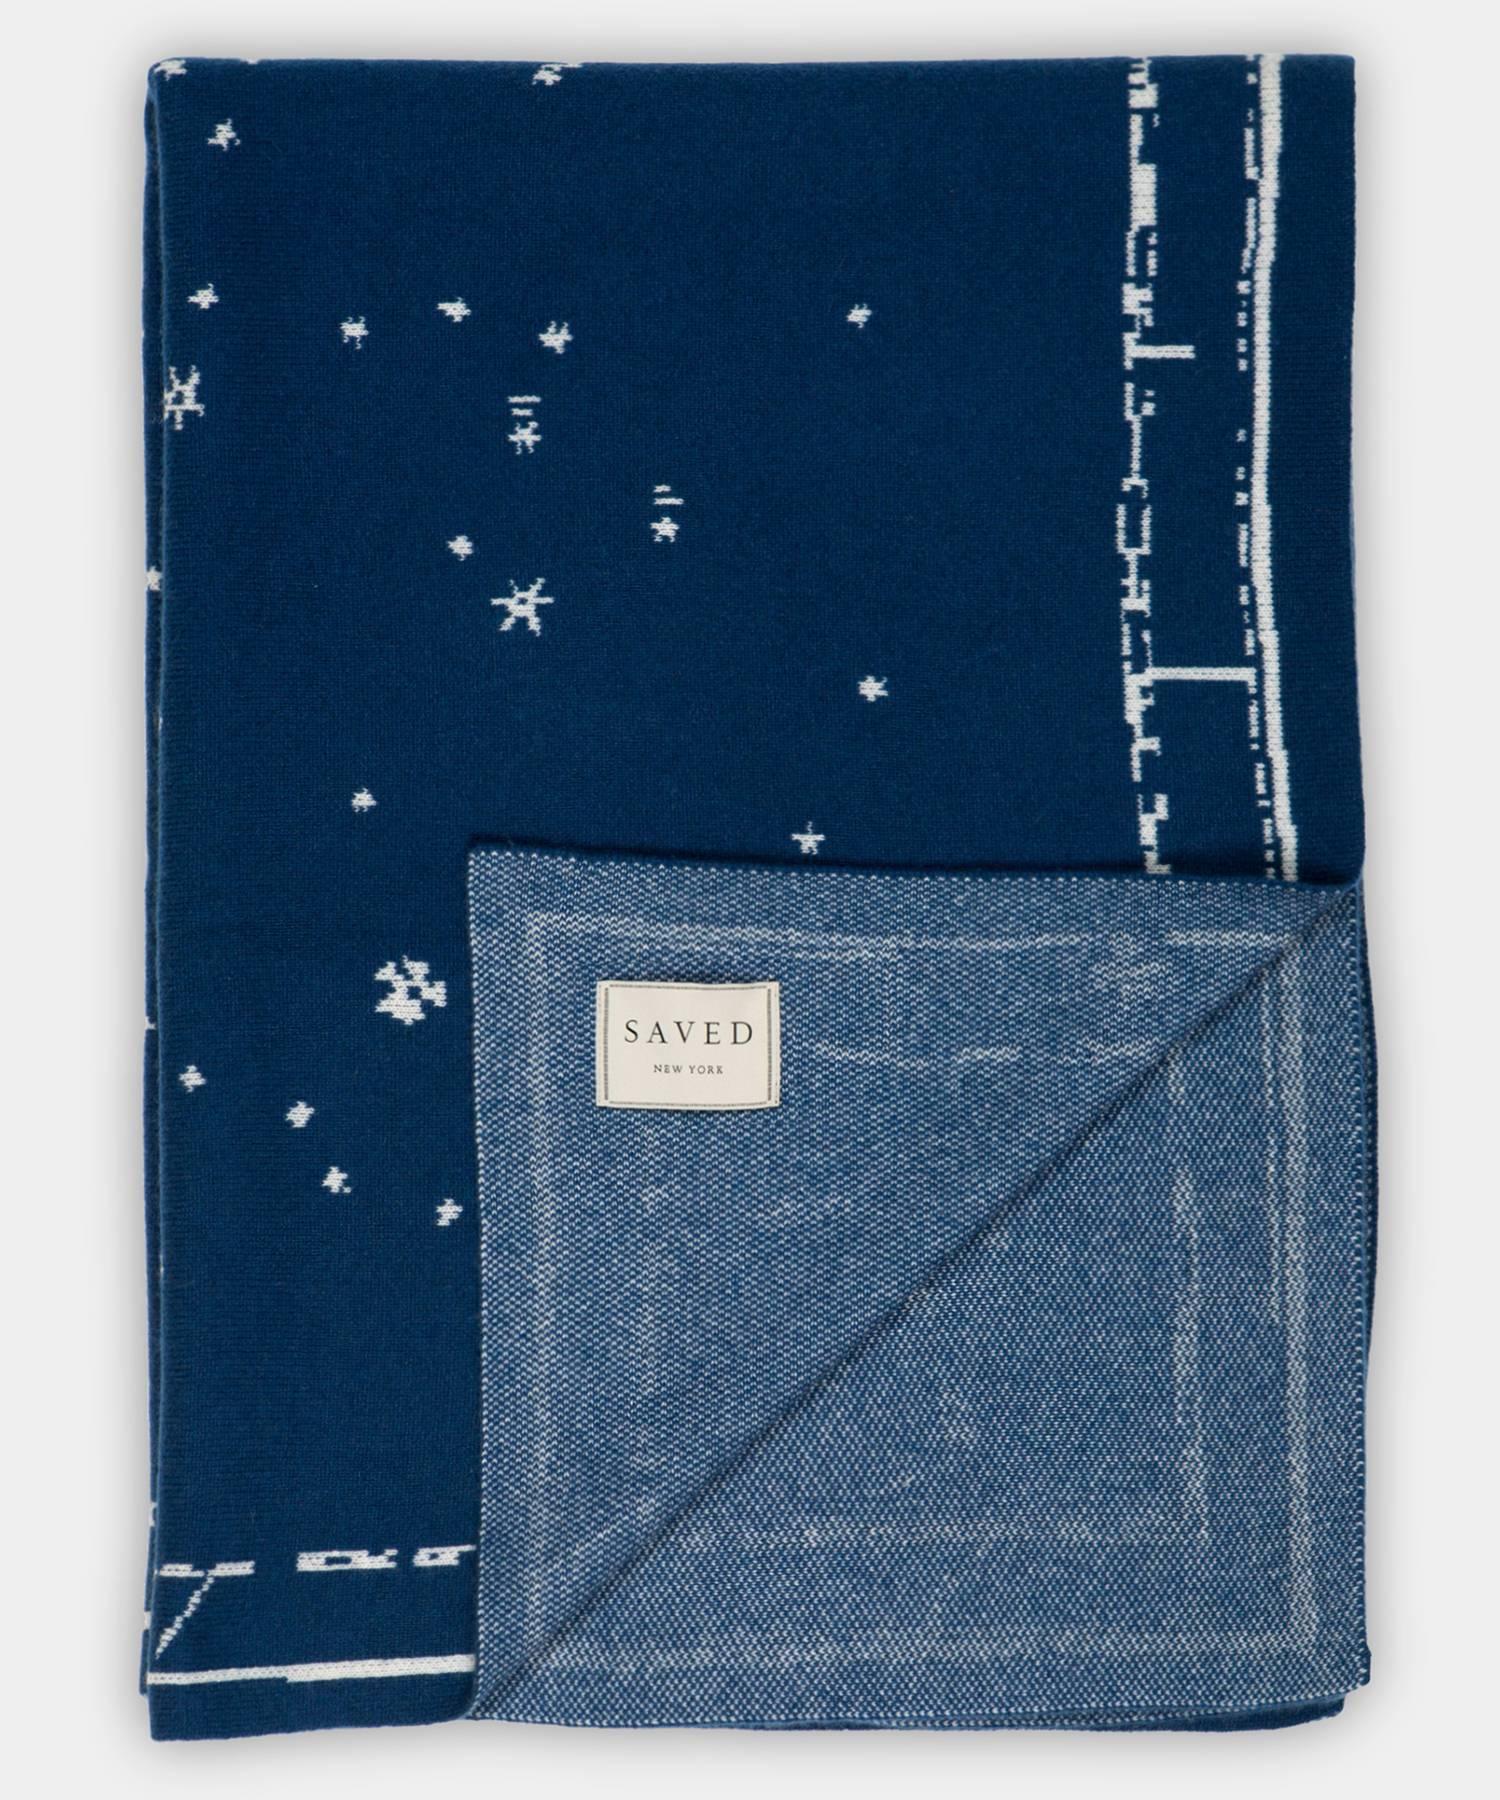 Constellation blanket by Saved, New York

Inspired by an 18th century celestial print of a starry night sky. Available in King and Queen sizes, please inquire for pricing, availability, and lead time.

100% cashmere

Measure: 51